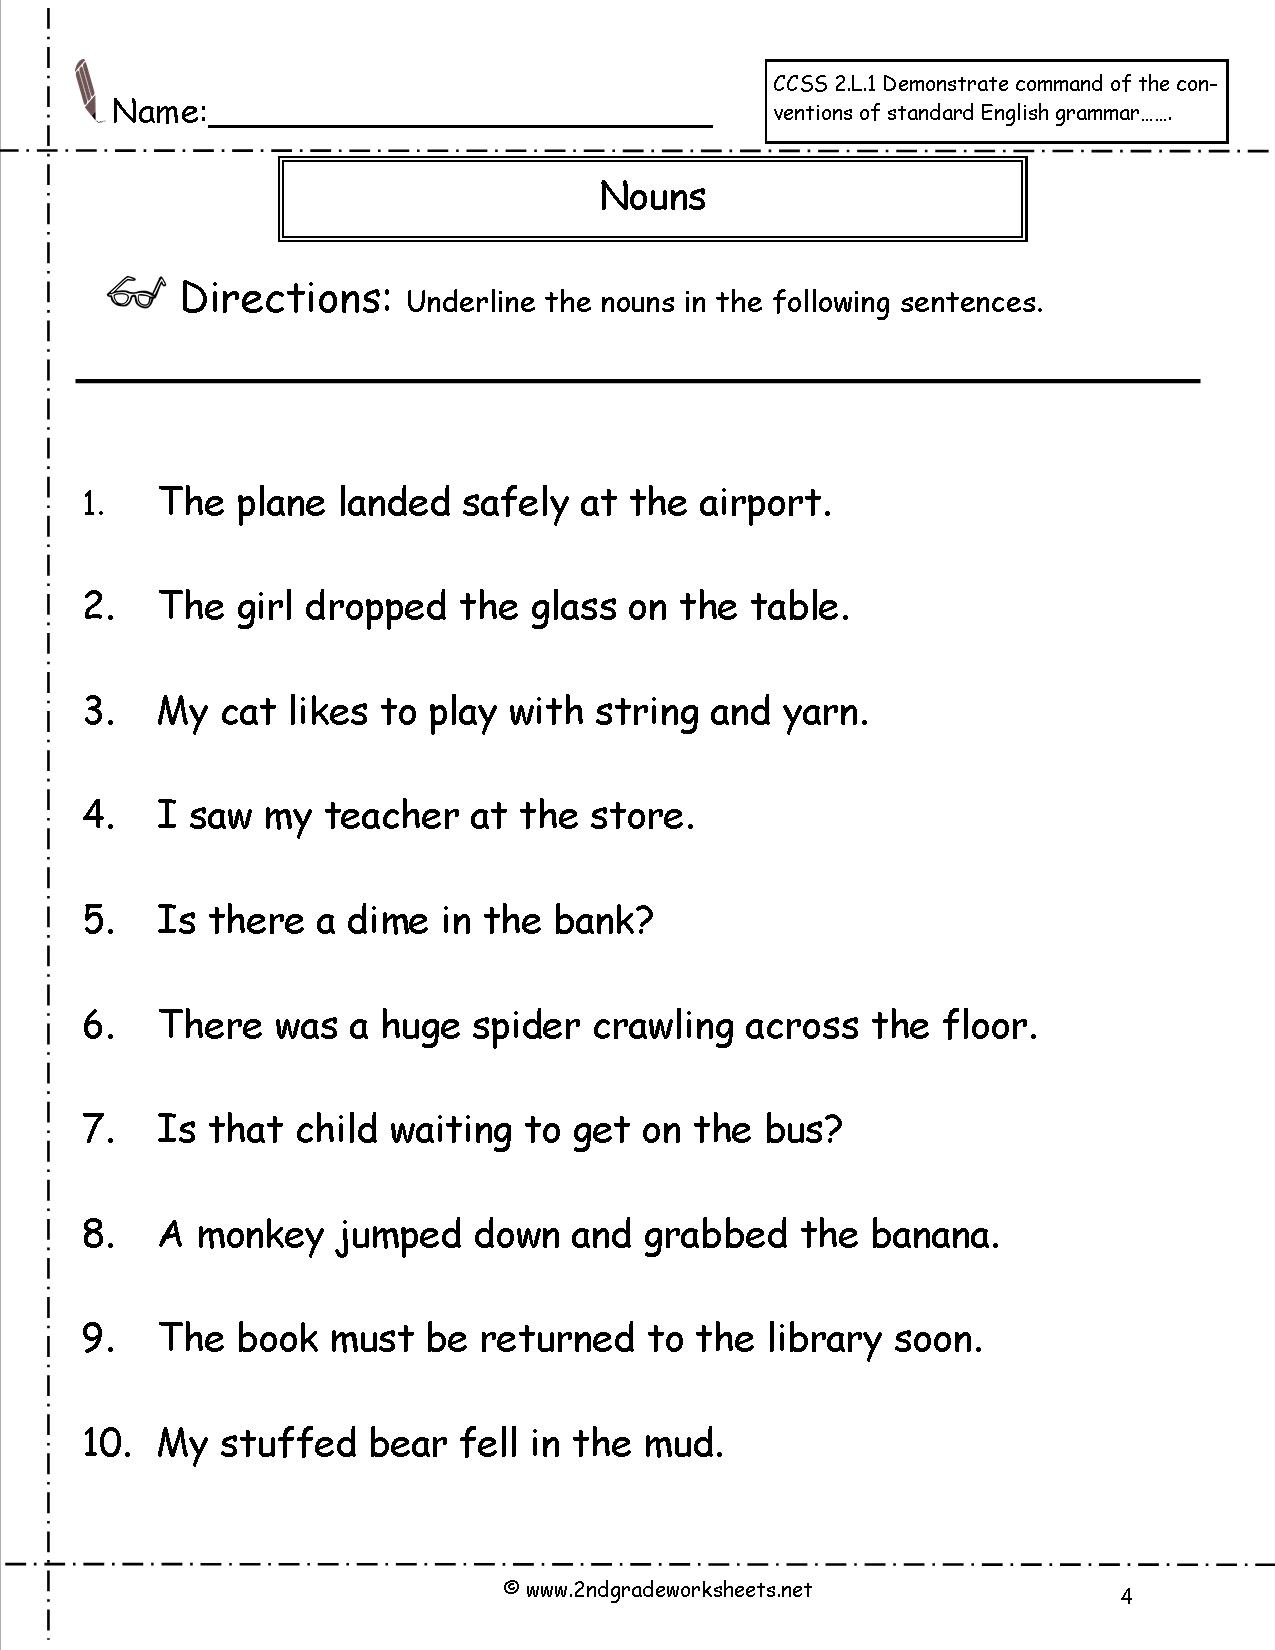 10 Best Images of Sentence Sequencing Worksheets - Sequencing Cut and